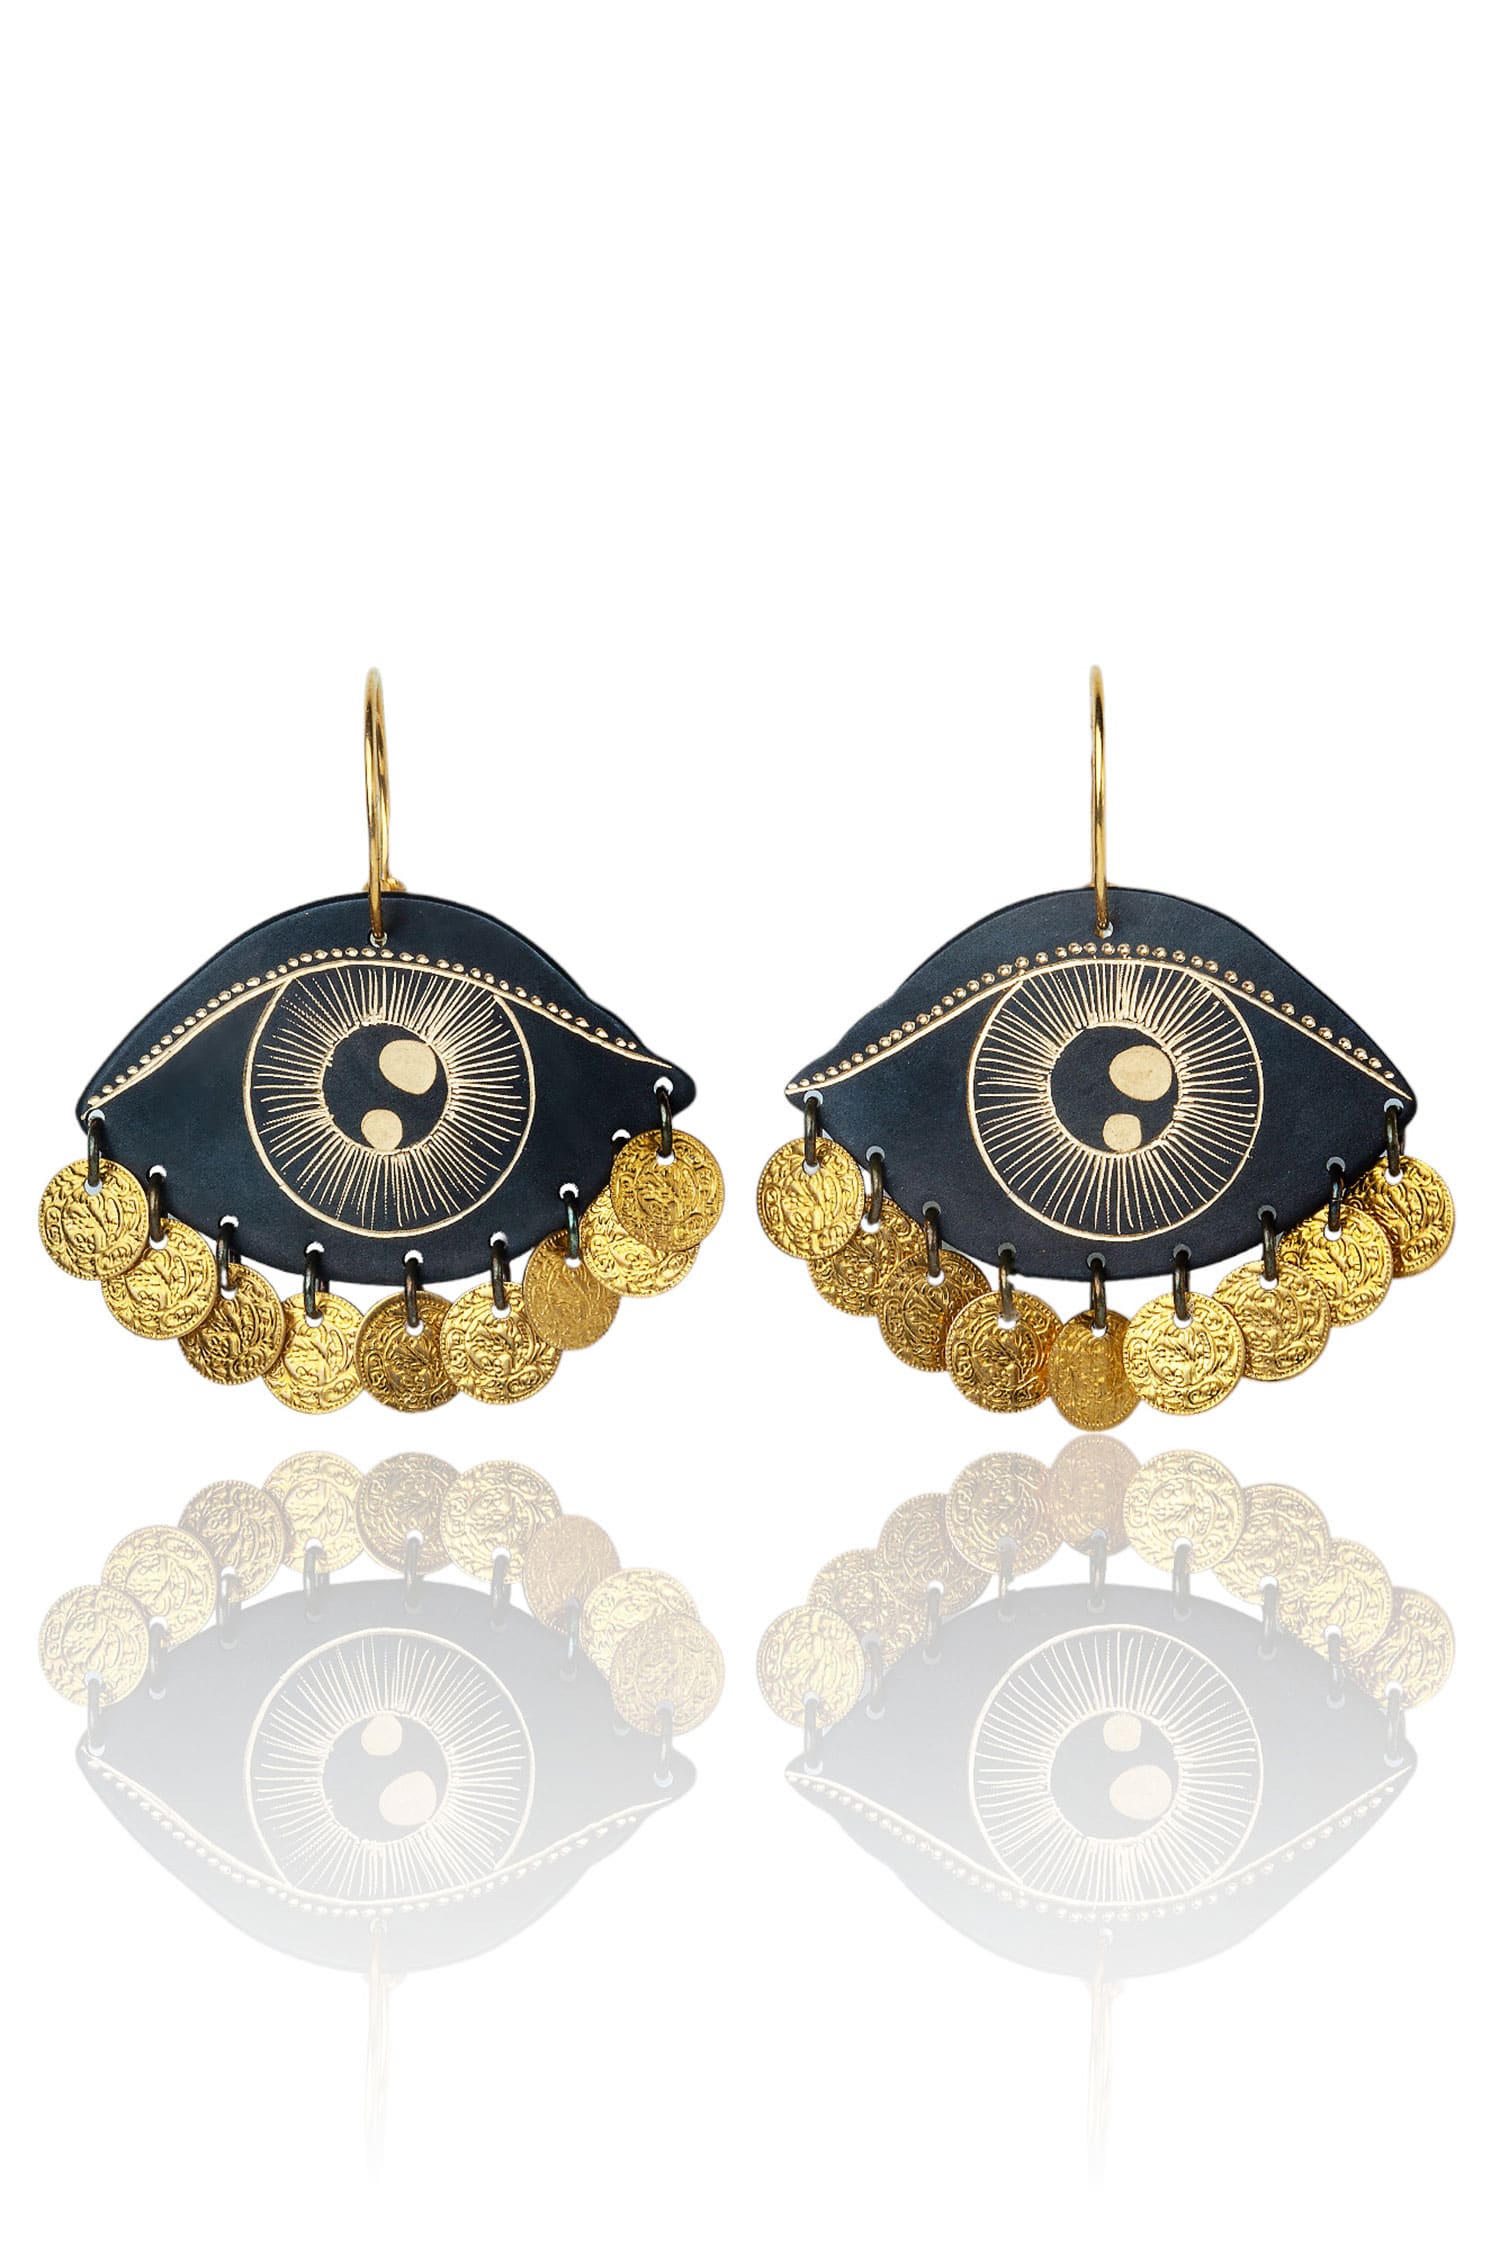 Eyes engraved bronze and silver earrings